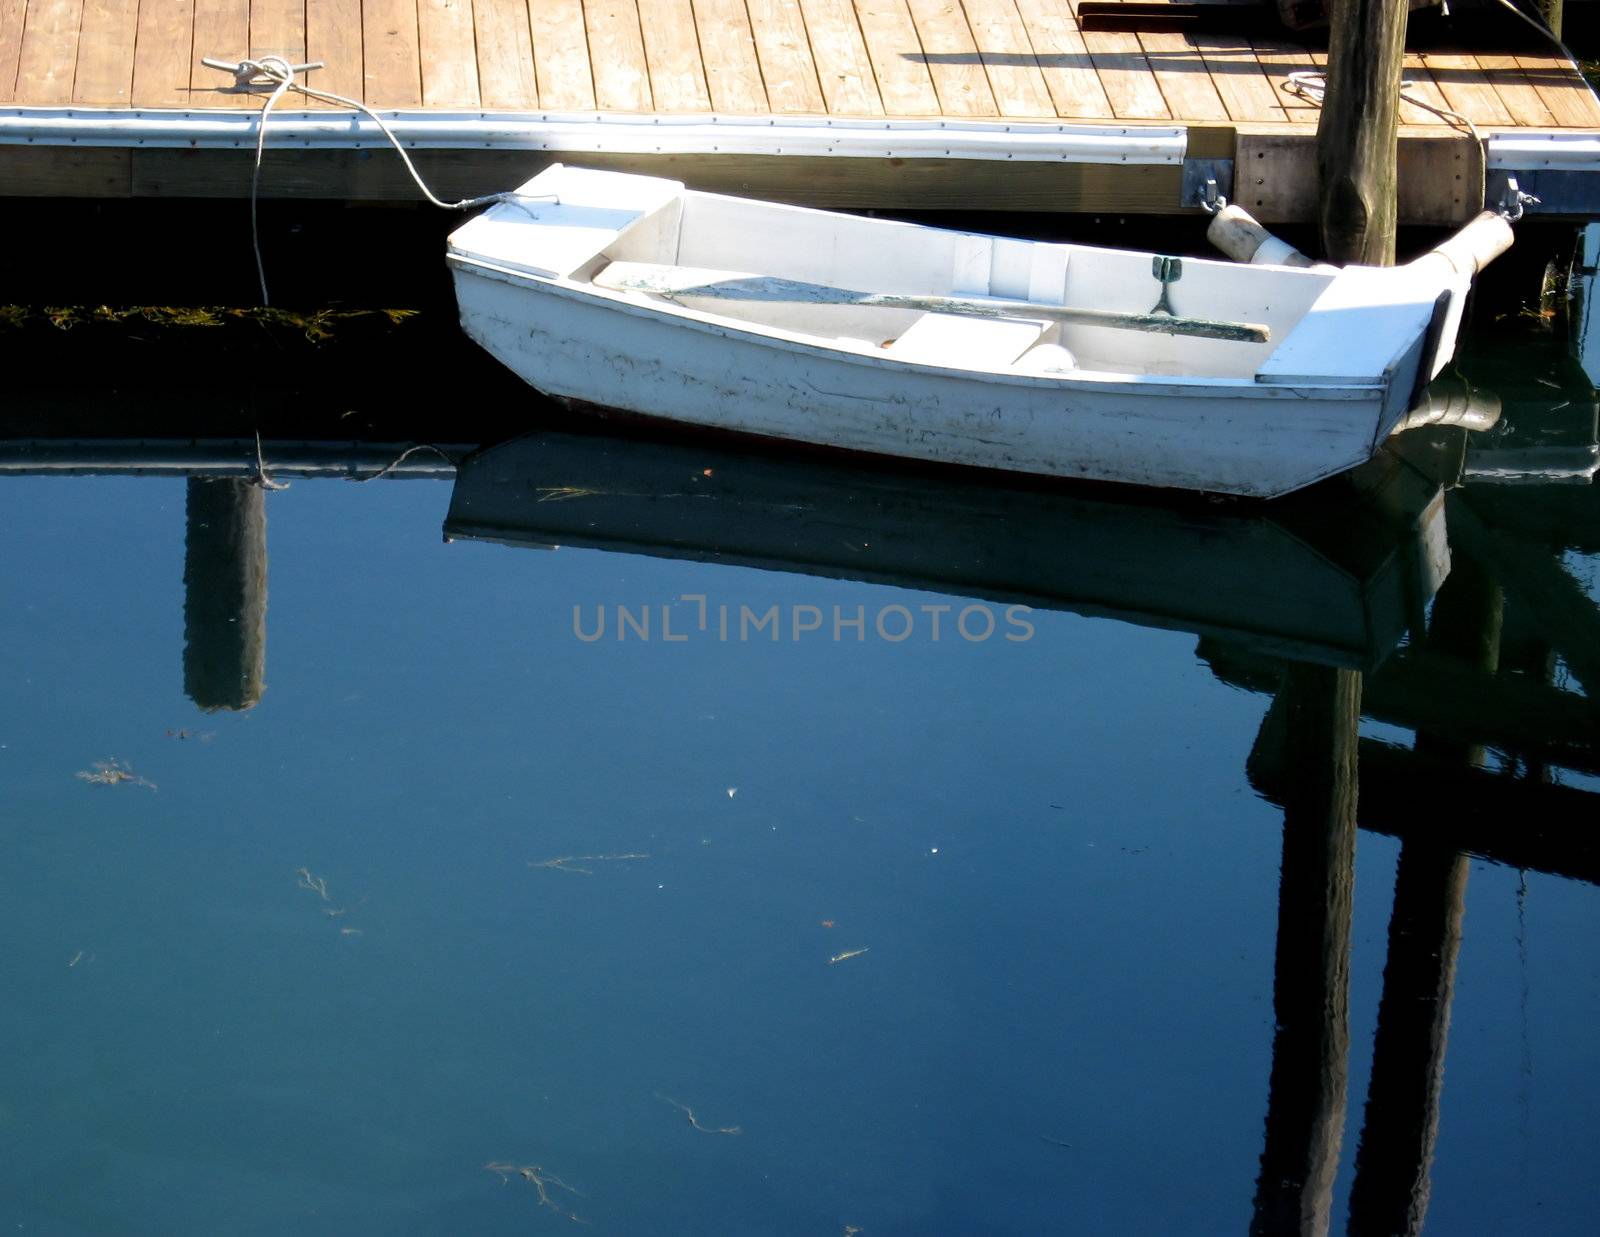 Skiff at Dock with Reflections by loongirl